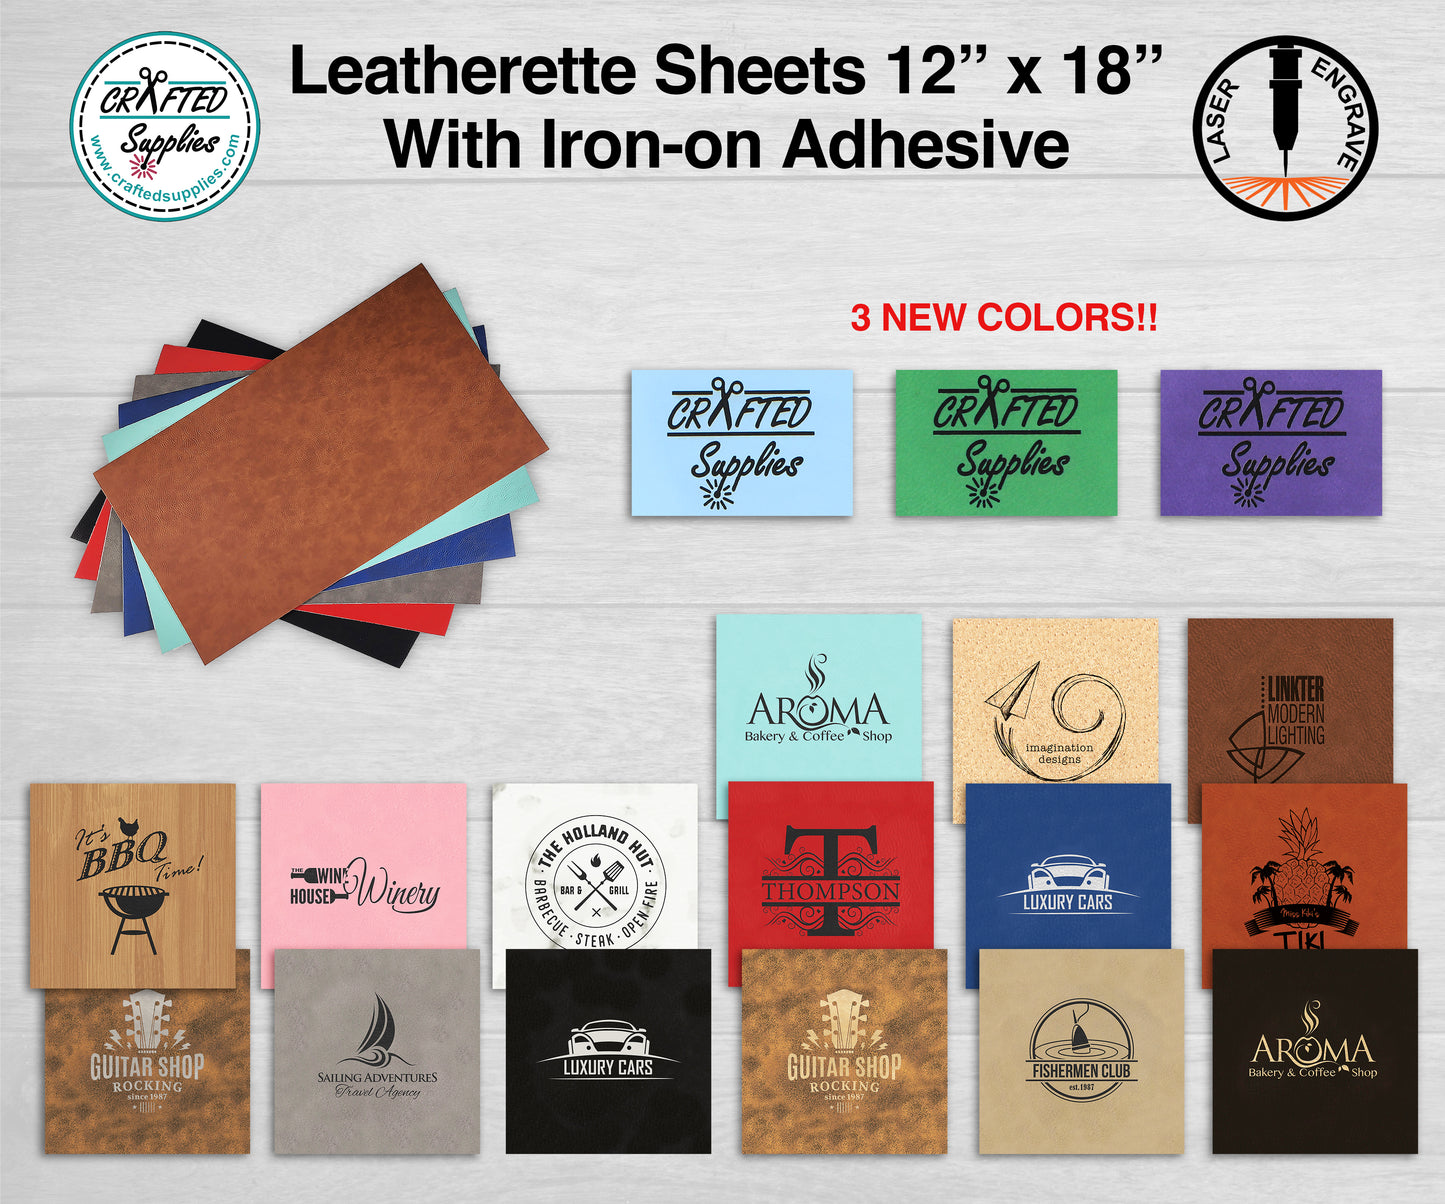 Leatherette sheet by crafted supplies with adhesive